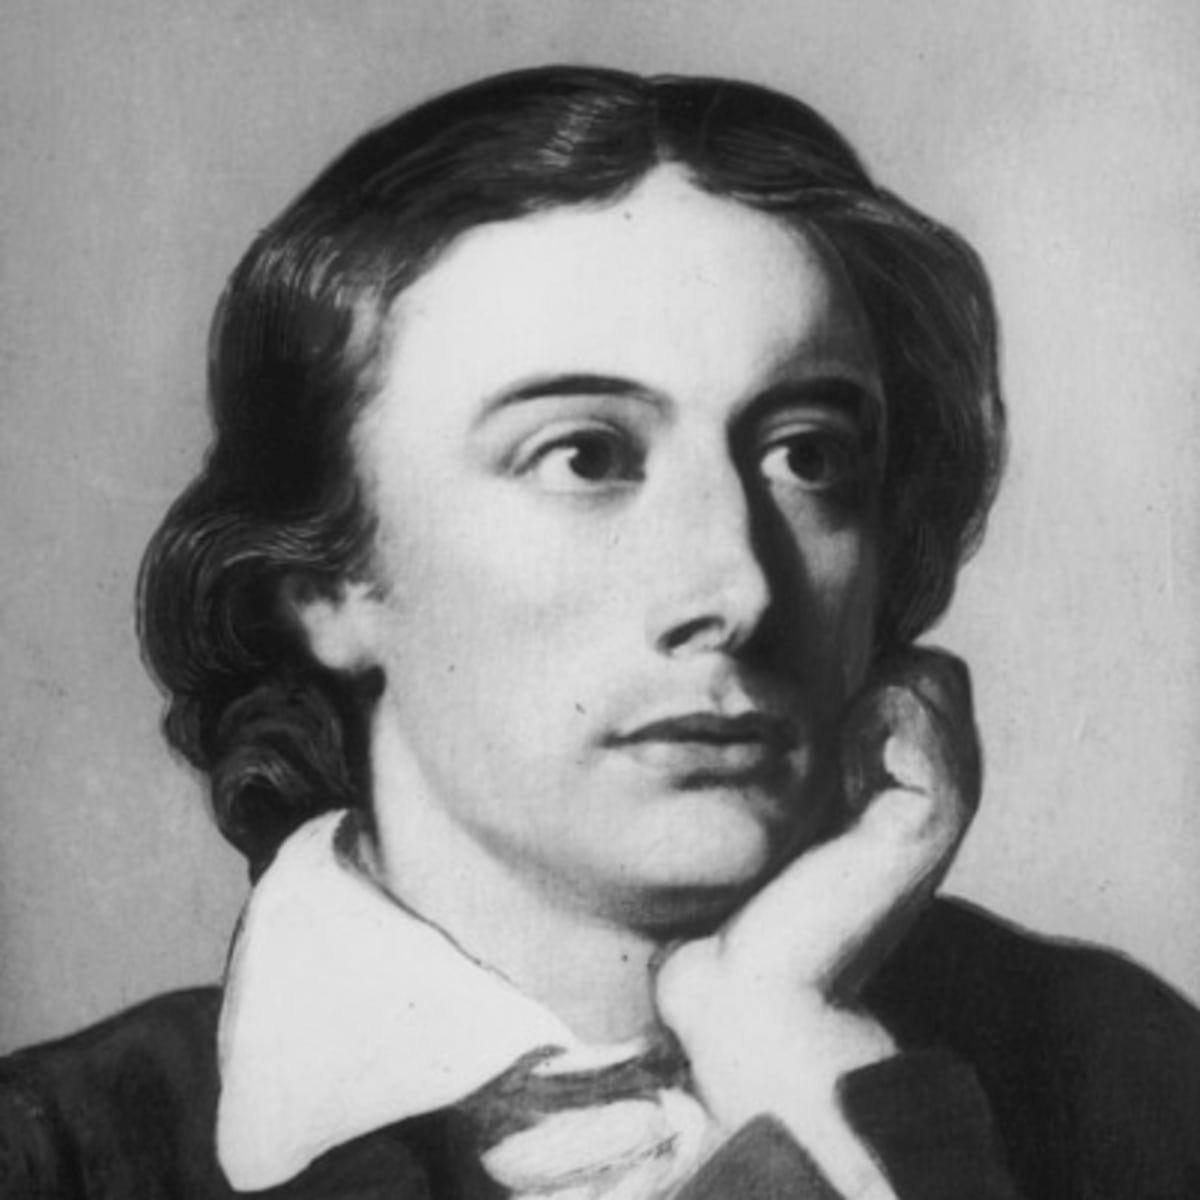 John Keats - Poems, Ode to a Nightingale &amp; Facts - Biography